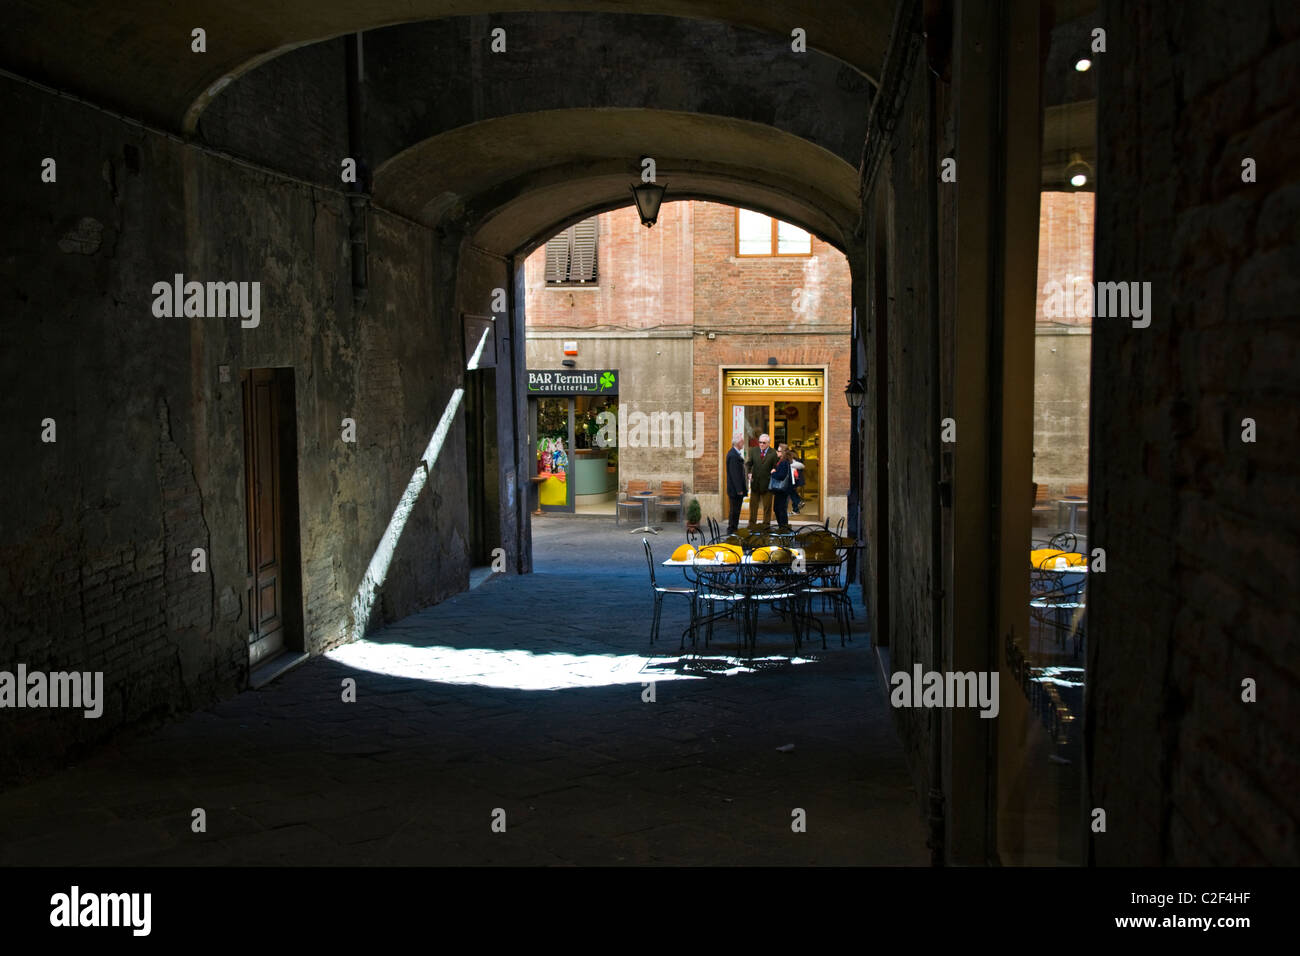 A Beam of Sunlight by Cafe in a Quiet Pedestrian Passageway in Siena Stock Photo